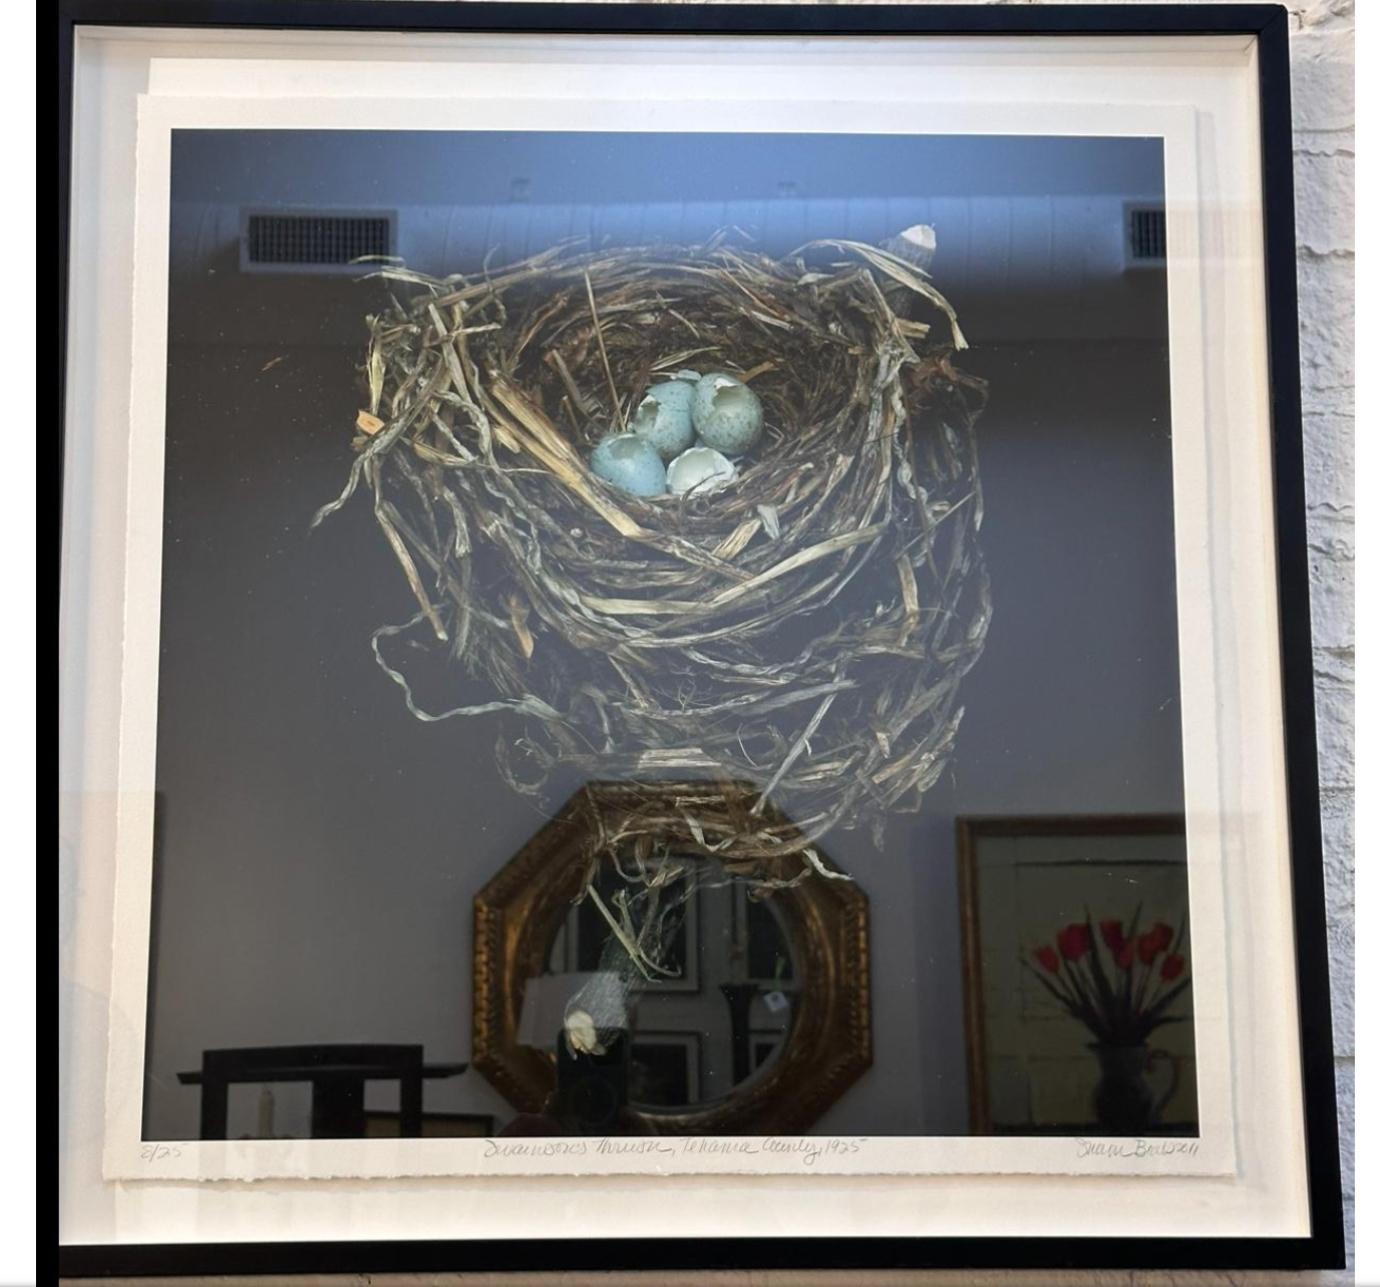 Modern Sharon Beals Lithograph of a Swainson's Thrush Nest For Sale